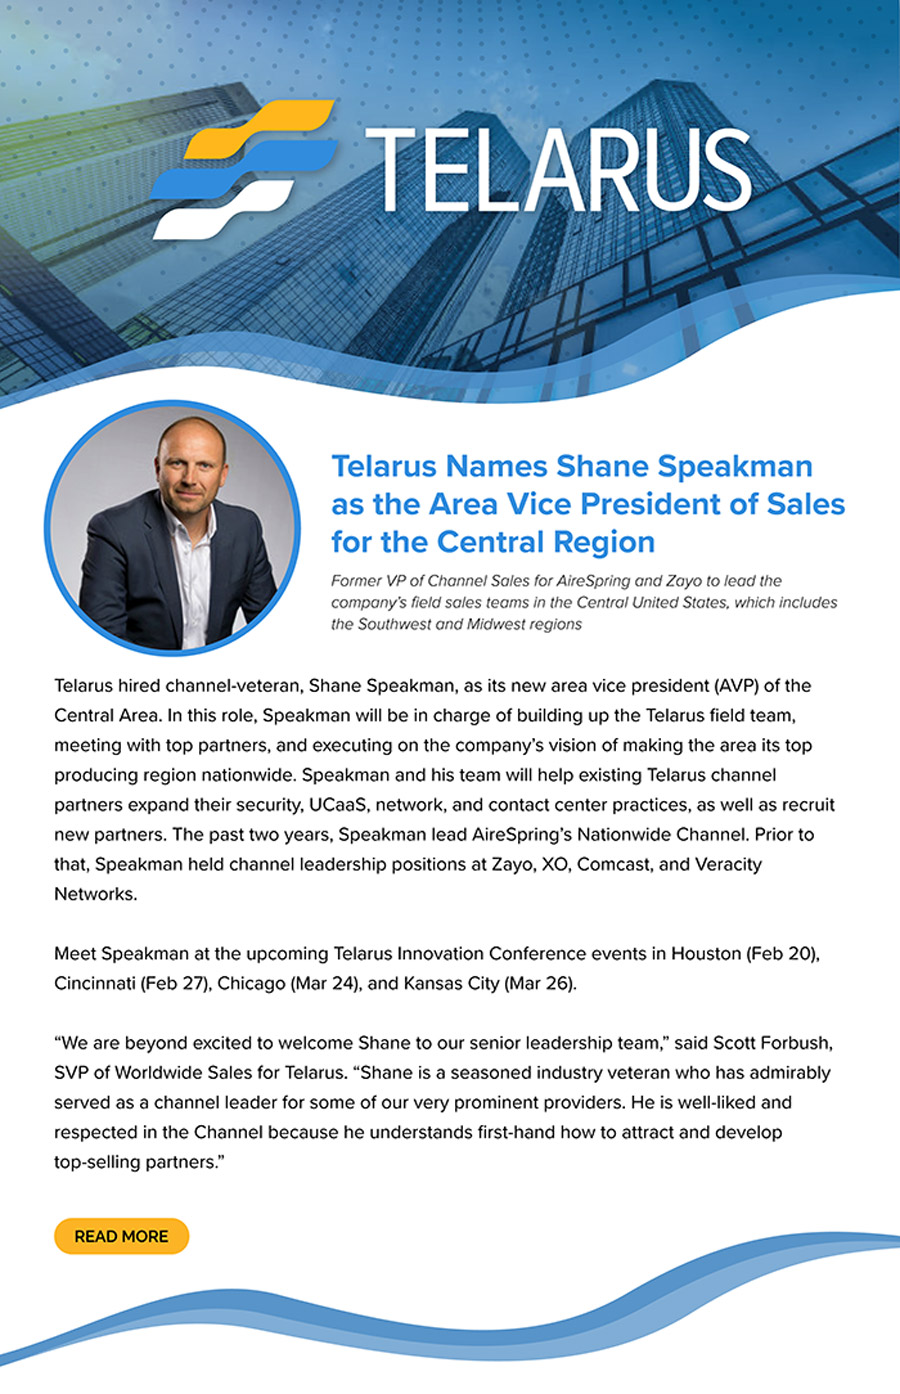 Telarus Names Shane Speakman the Area Vice President of Sales for the Central Region